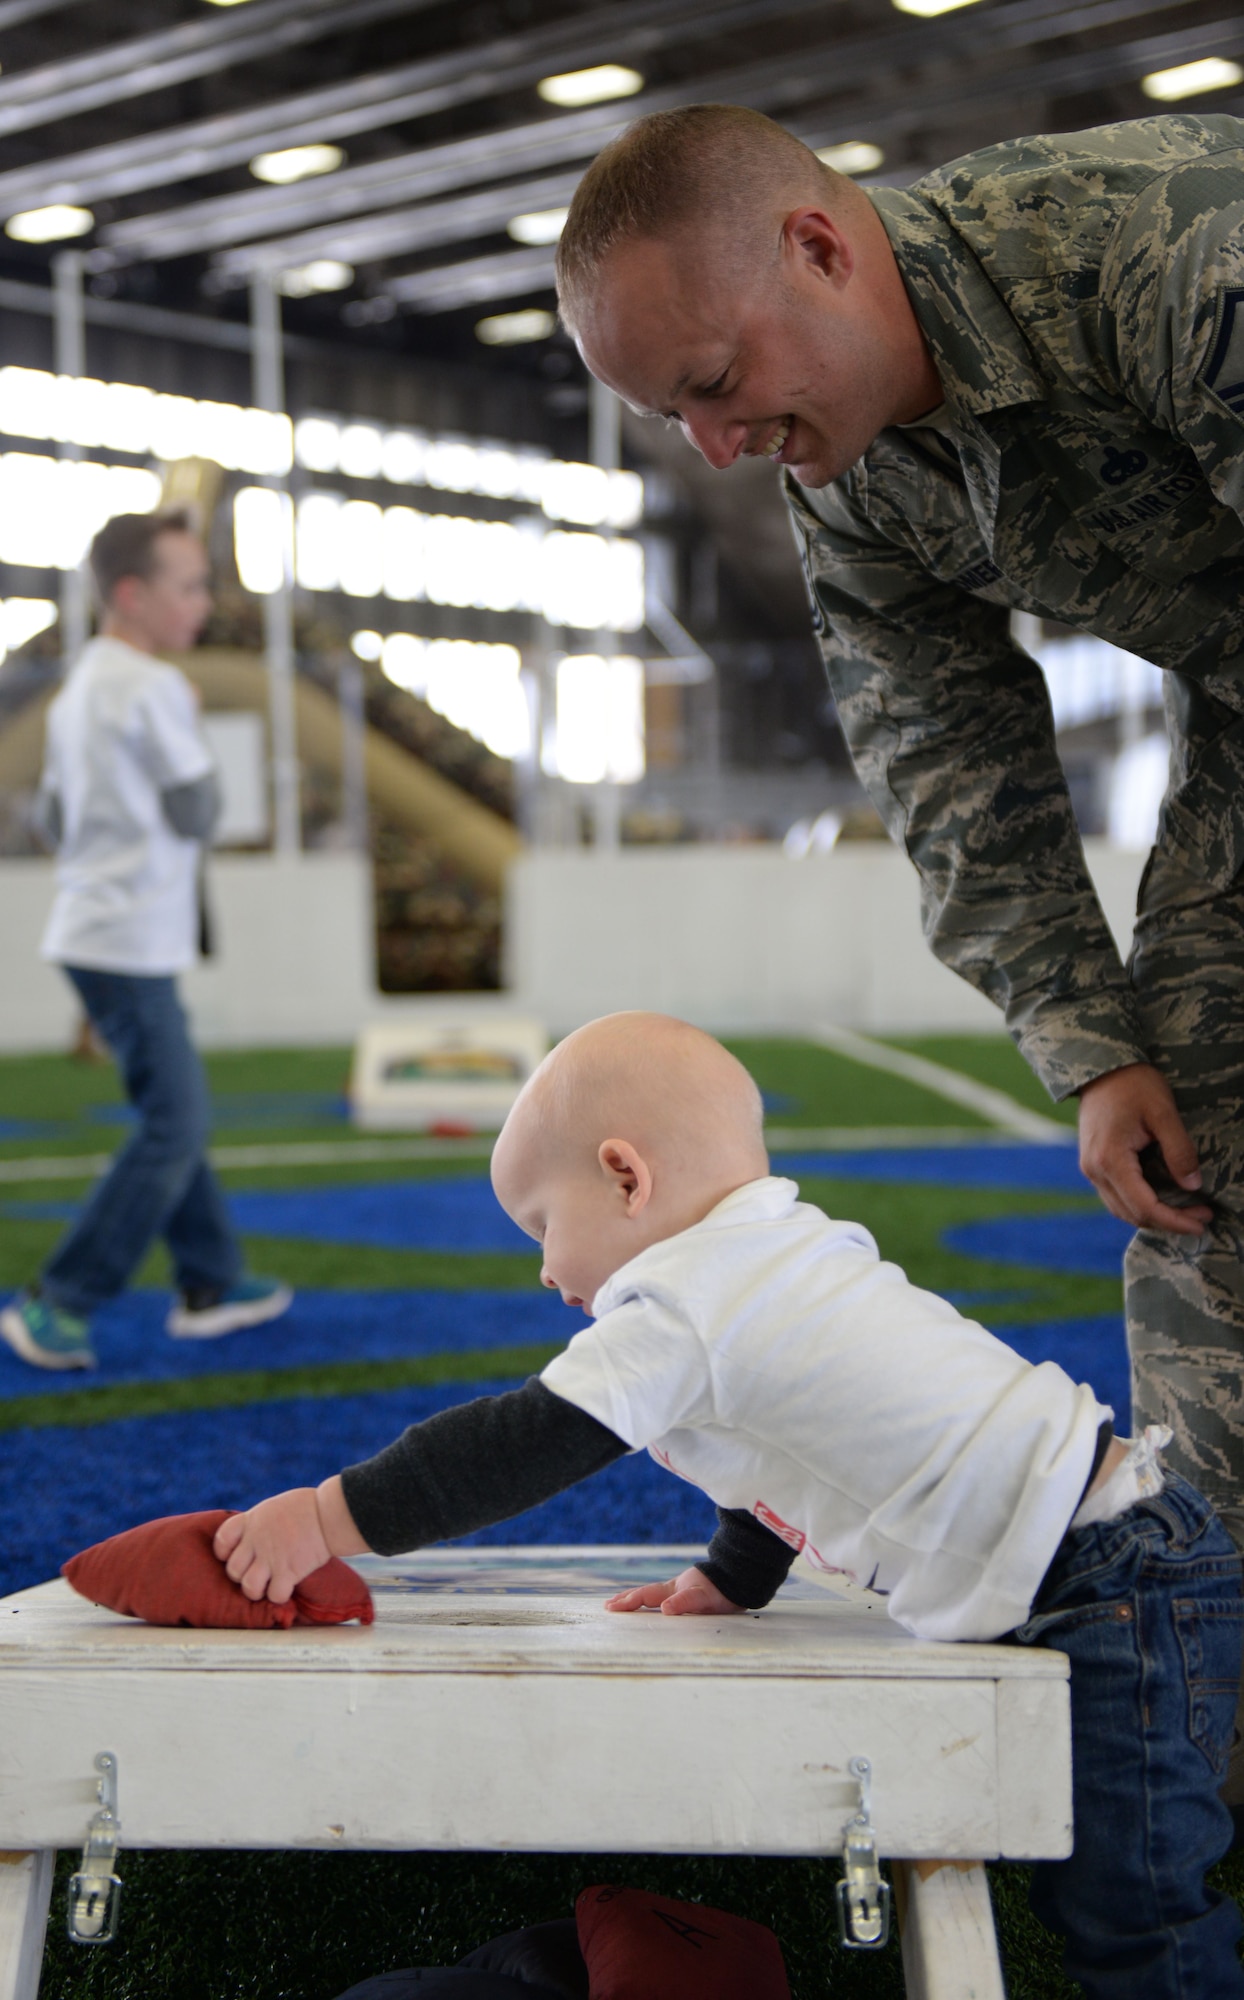 Master Sgt. Michael Cromer, a flight line expeditor assigned to the 28th Aircraft Maintenance Squadron, watches his son, Jonah, play with a bean bag at the Pride Hangar at Ellsworth Air Force Base, S.D., Jan. 29, 2018. B-1 bombers from the 37th Bomb Squadron and Airmen from the 37th Aircraft Maintenance Unit were deployed to Andersen AFB, Guam, to take part in the Continuous Bomber Presence mission. (U.S. Air Force photo by Airman 1st Class Nicolas Z. Erwin)